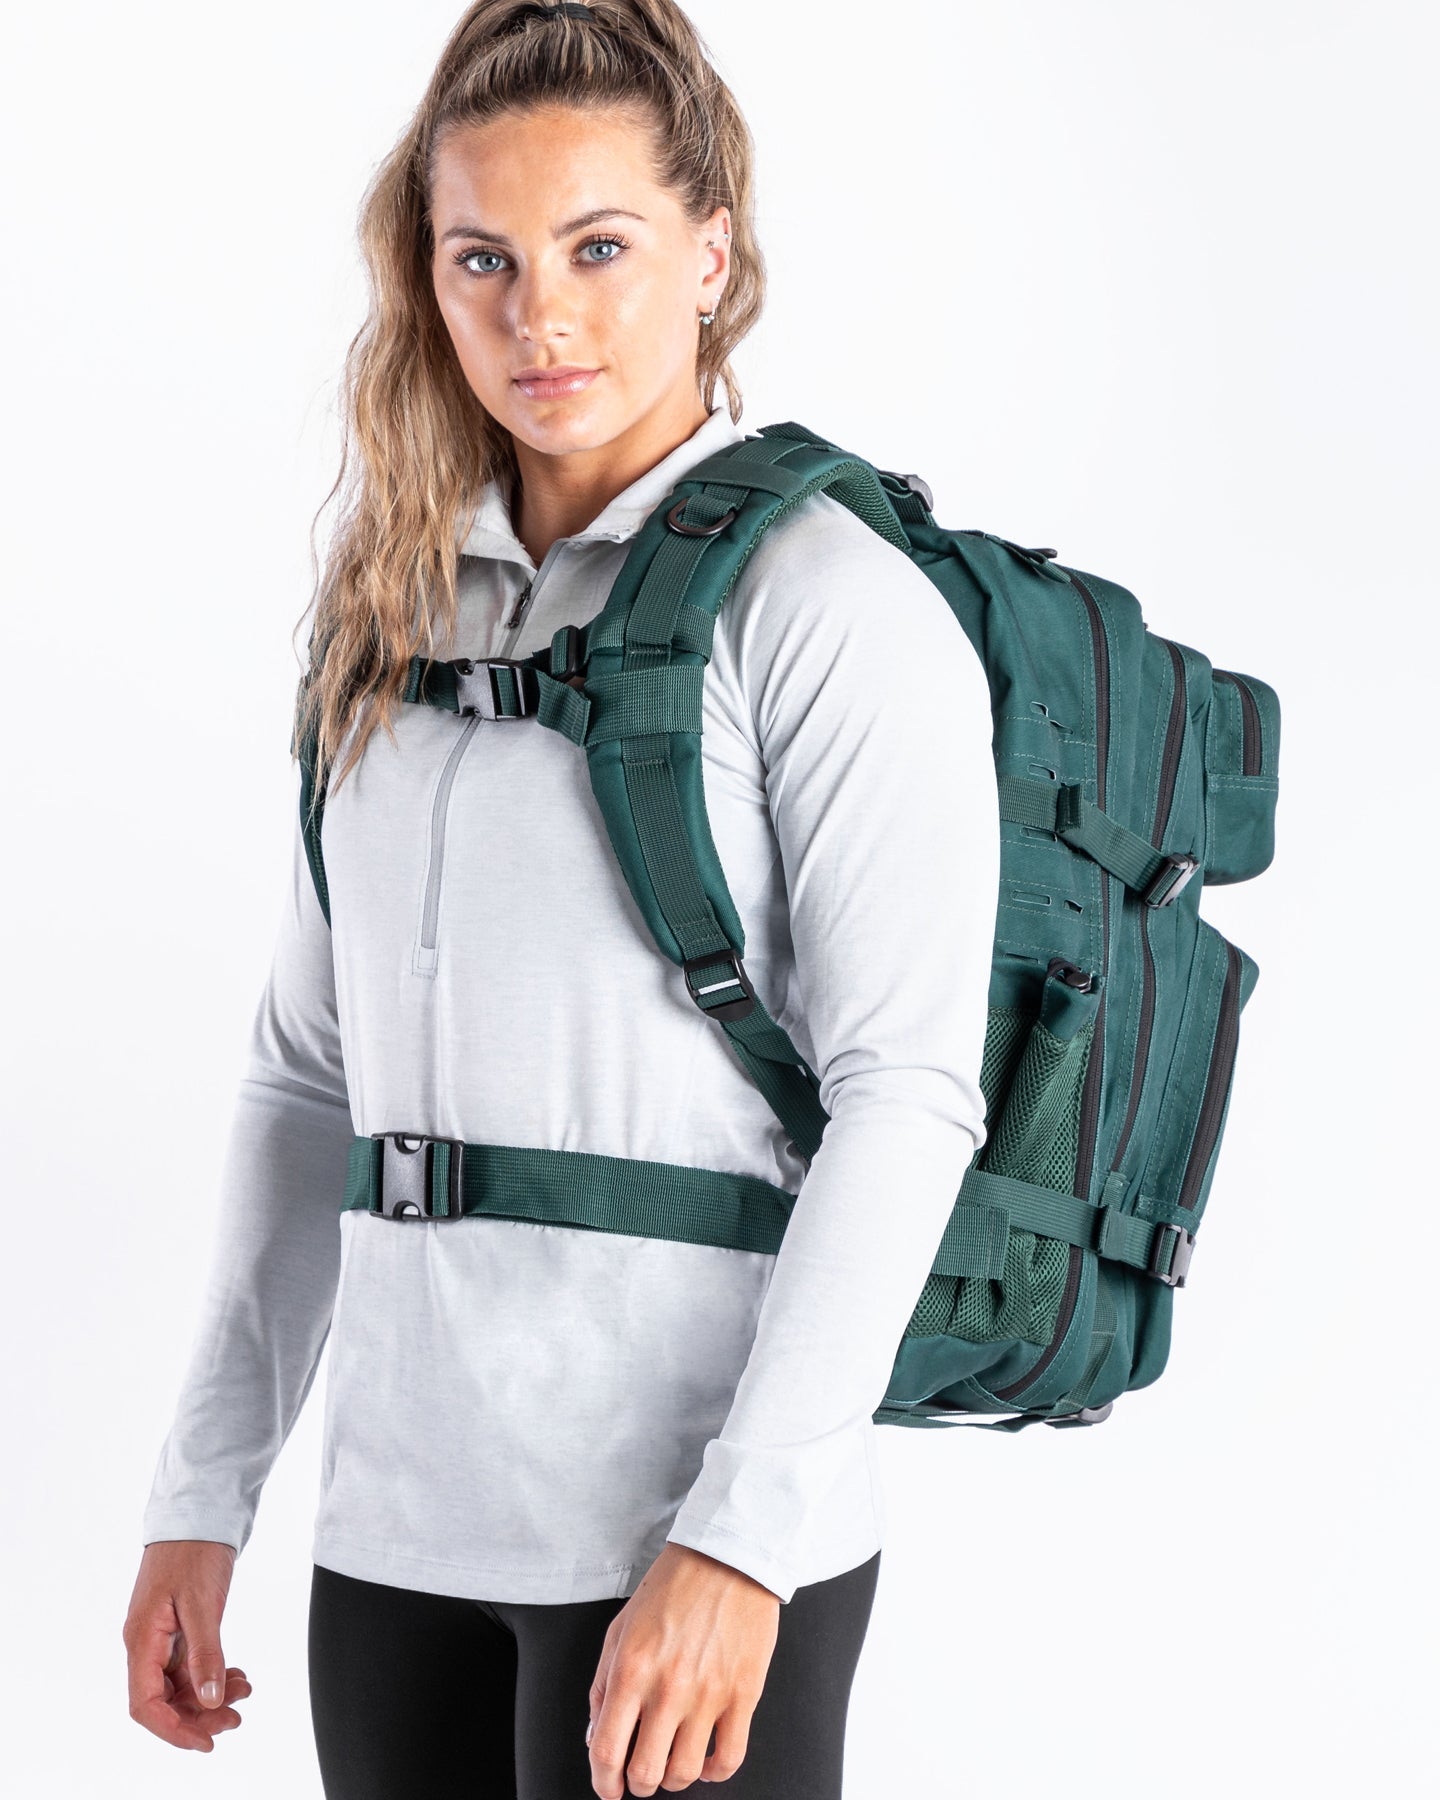 Large Forest Green Gym Backpack